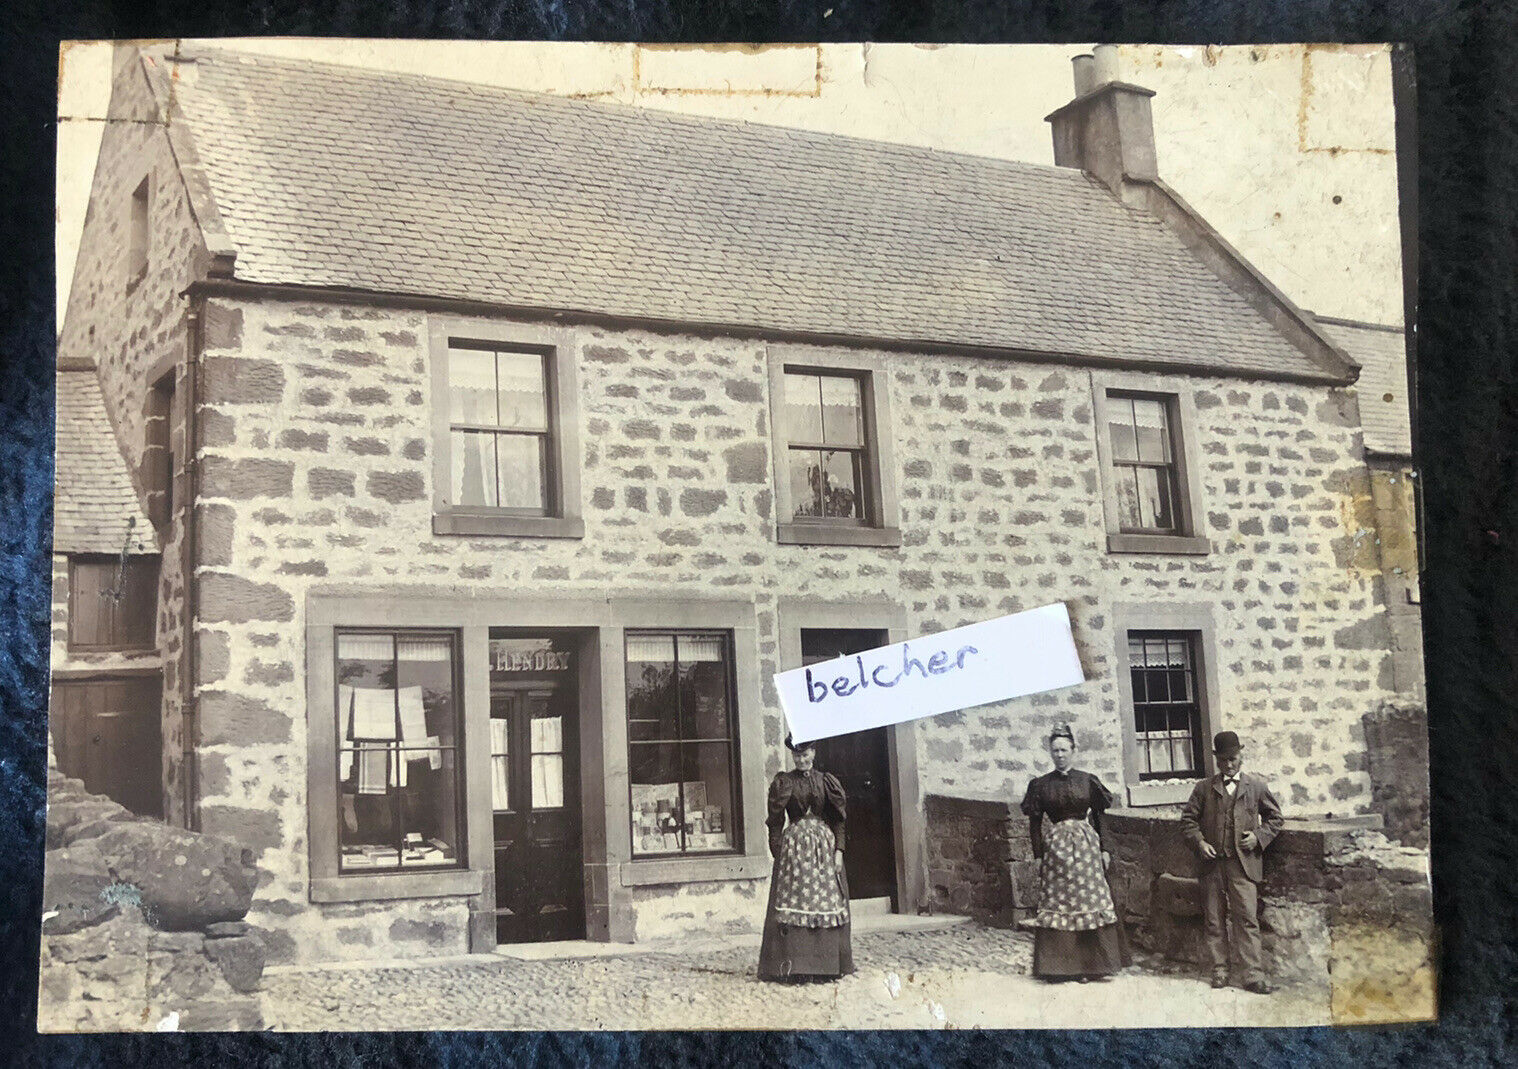 House Clearance - c1900 Swinton Nr Duns Hendry Shop Front Berwickshire Vintage Card Backed Photo